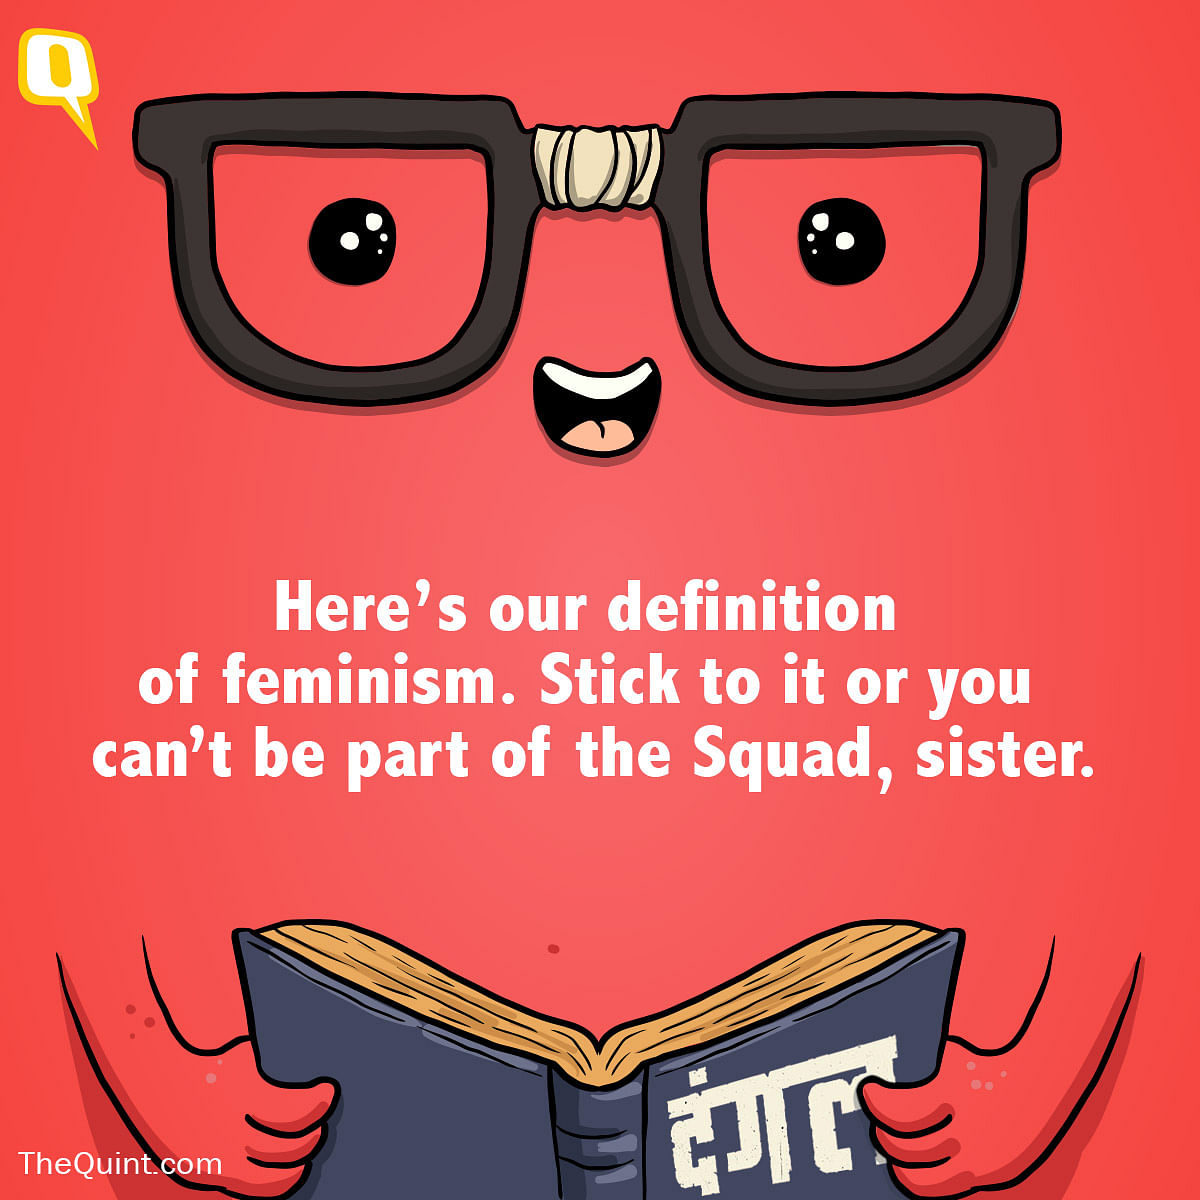 Sorry, sisters, you can’t be part of the Squad since all your success is a patriarchal conspiracy.